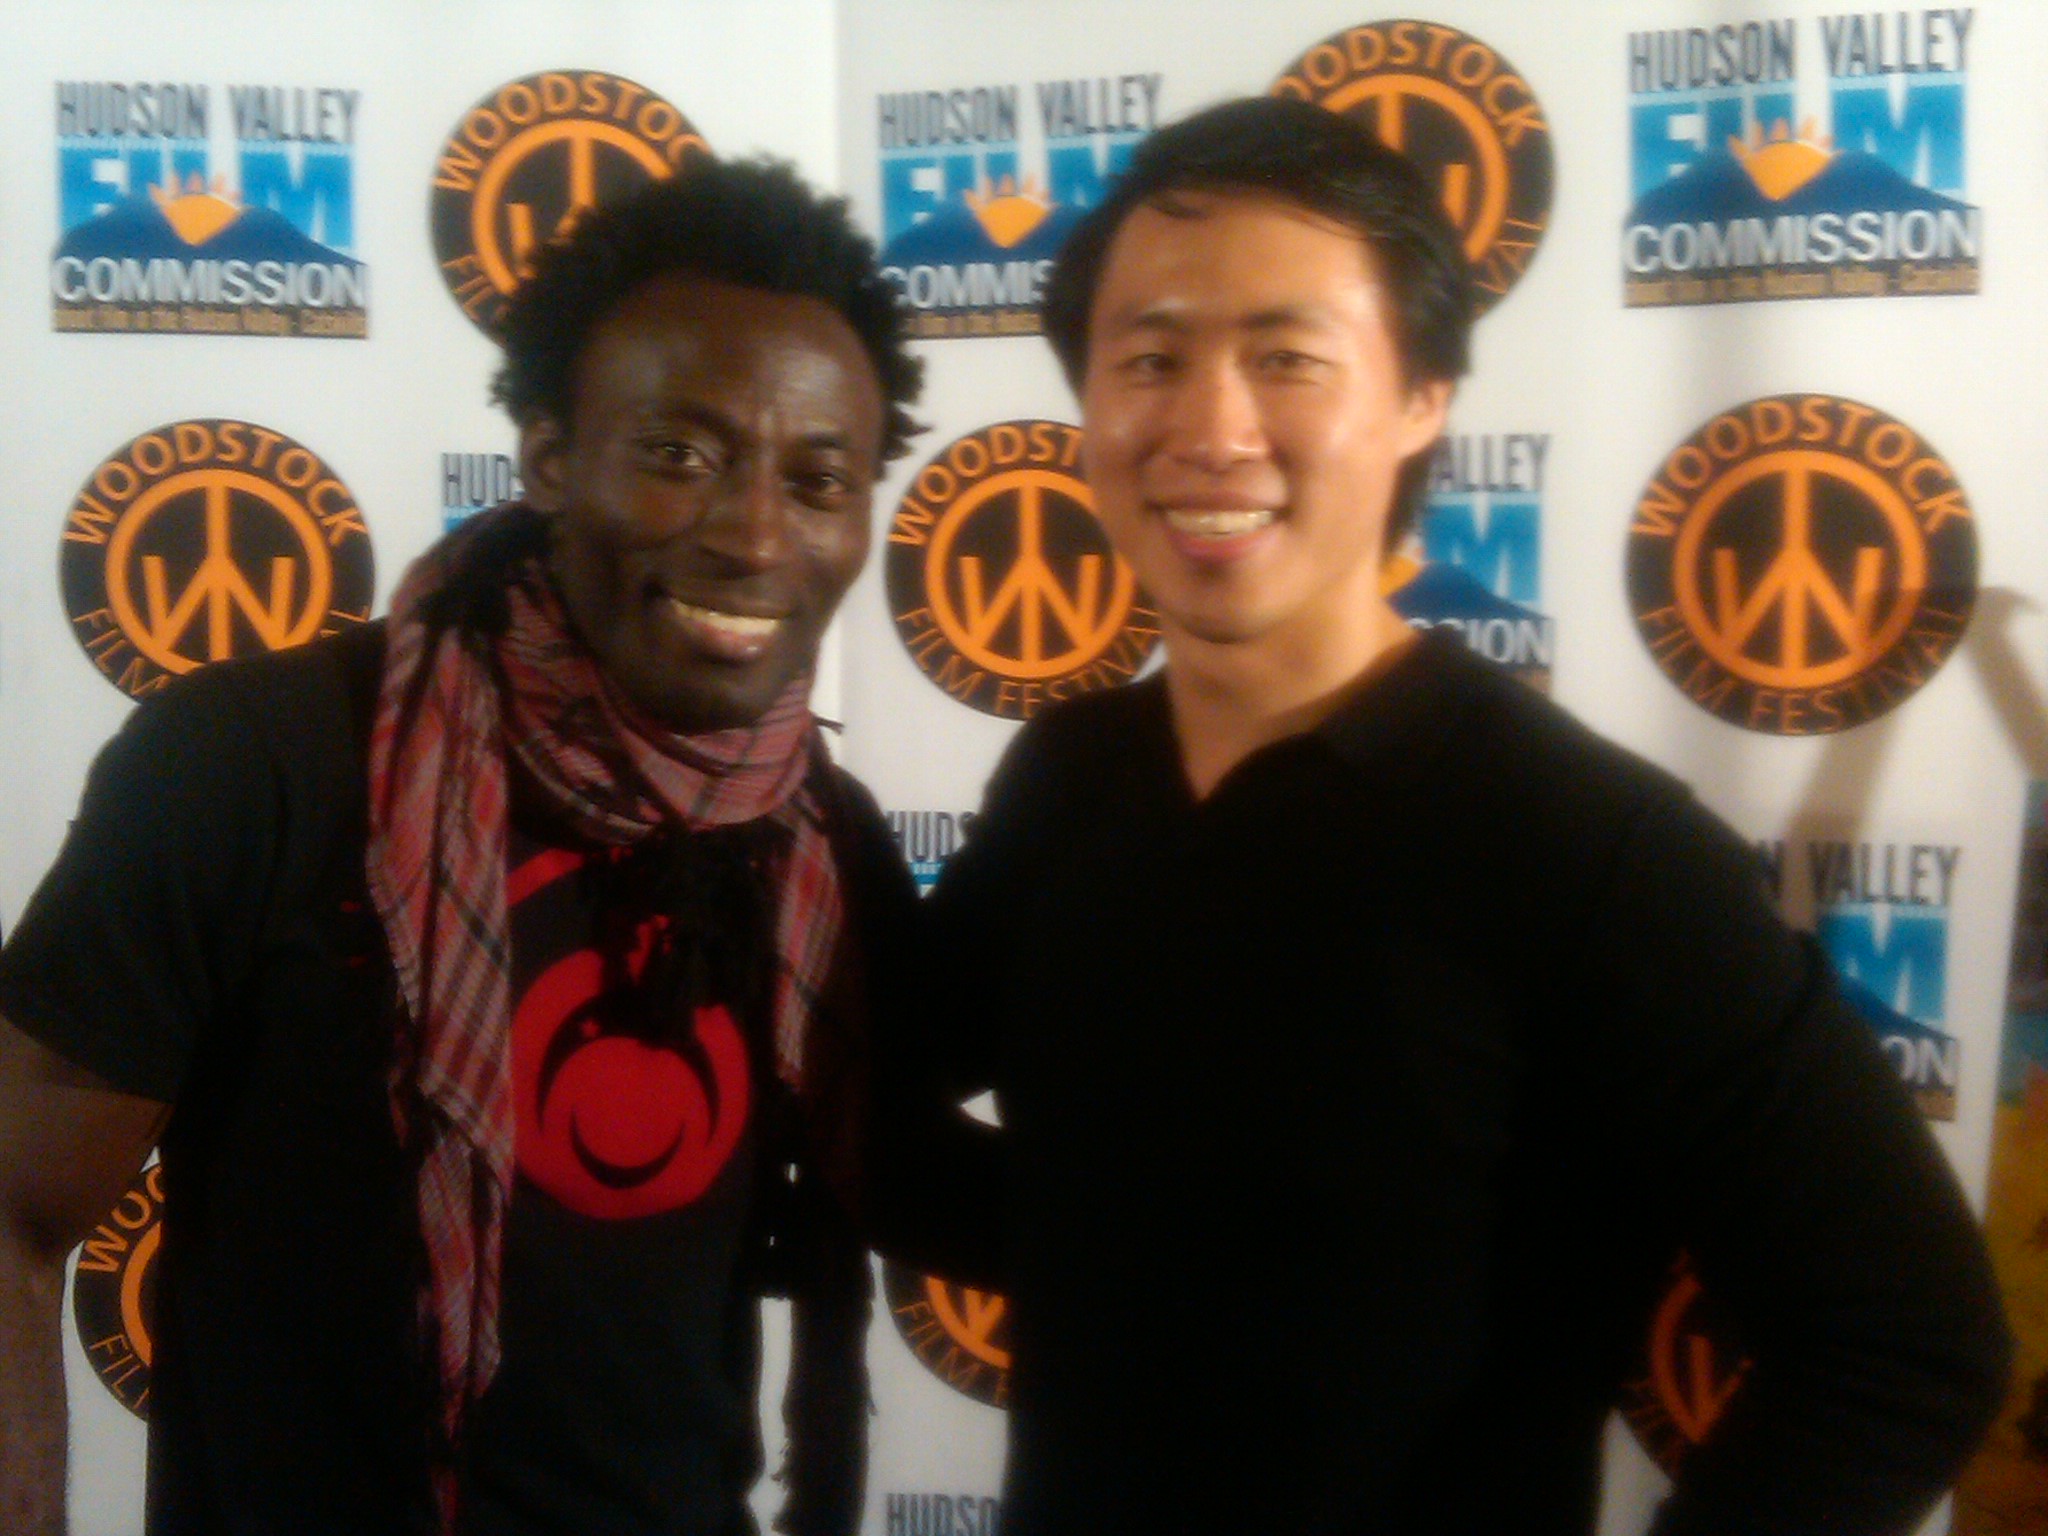 Babs Olusanmokun and Stephen Lin at The Woodstock Film Festival